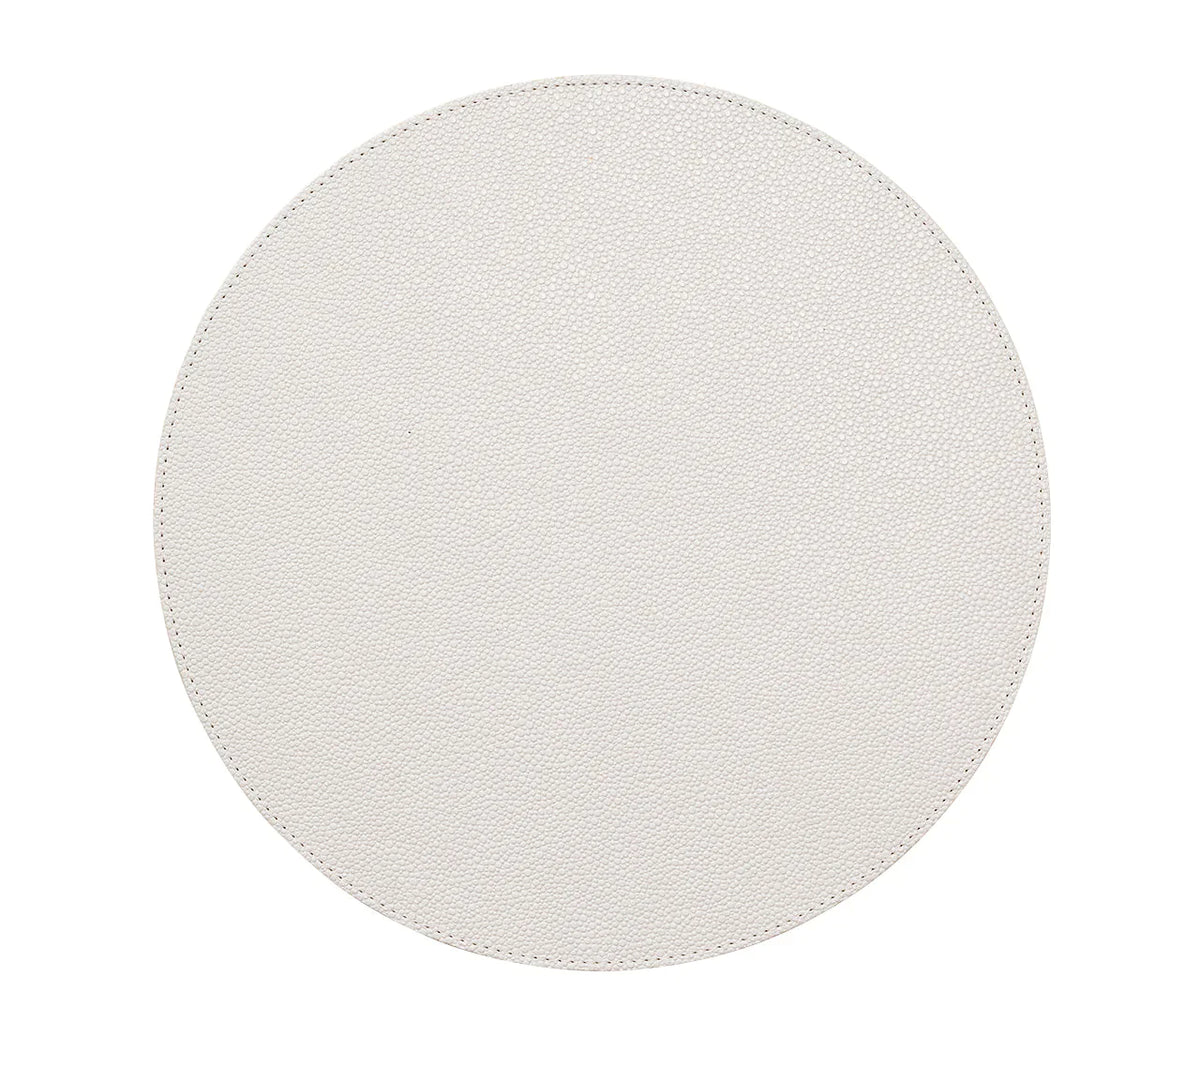 Pebble Placemat, Set of 4